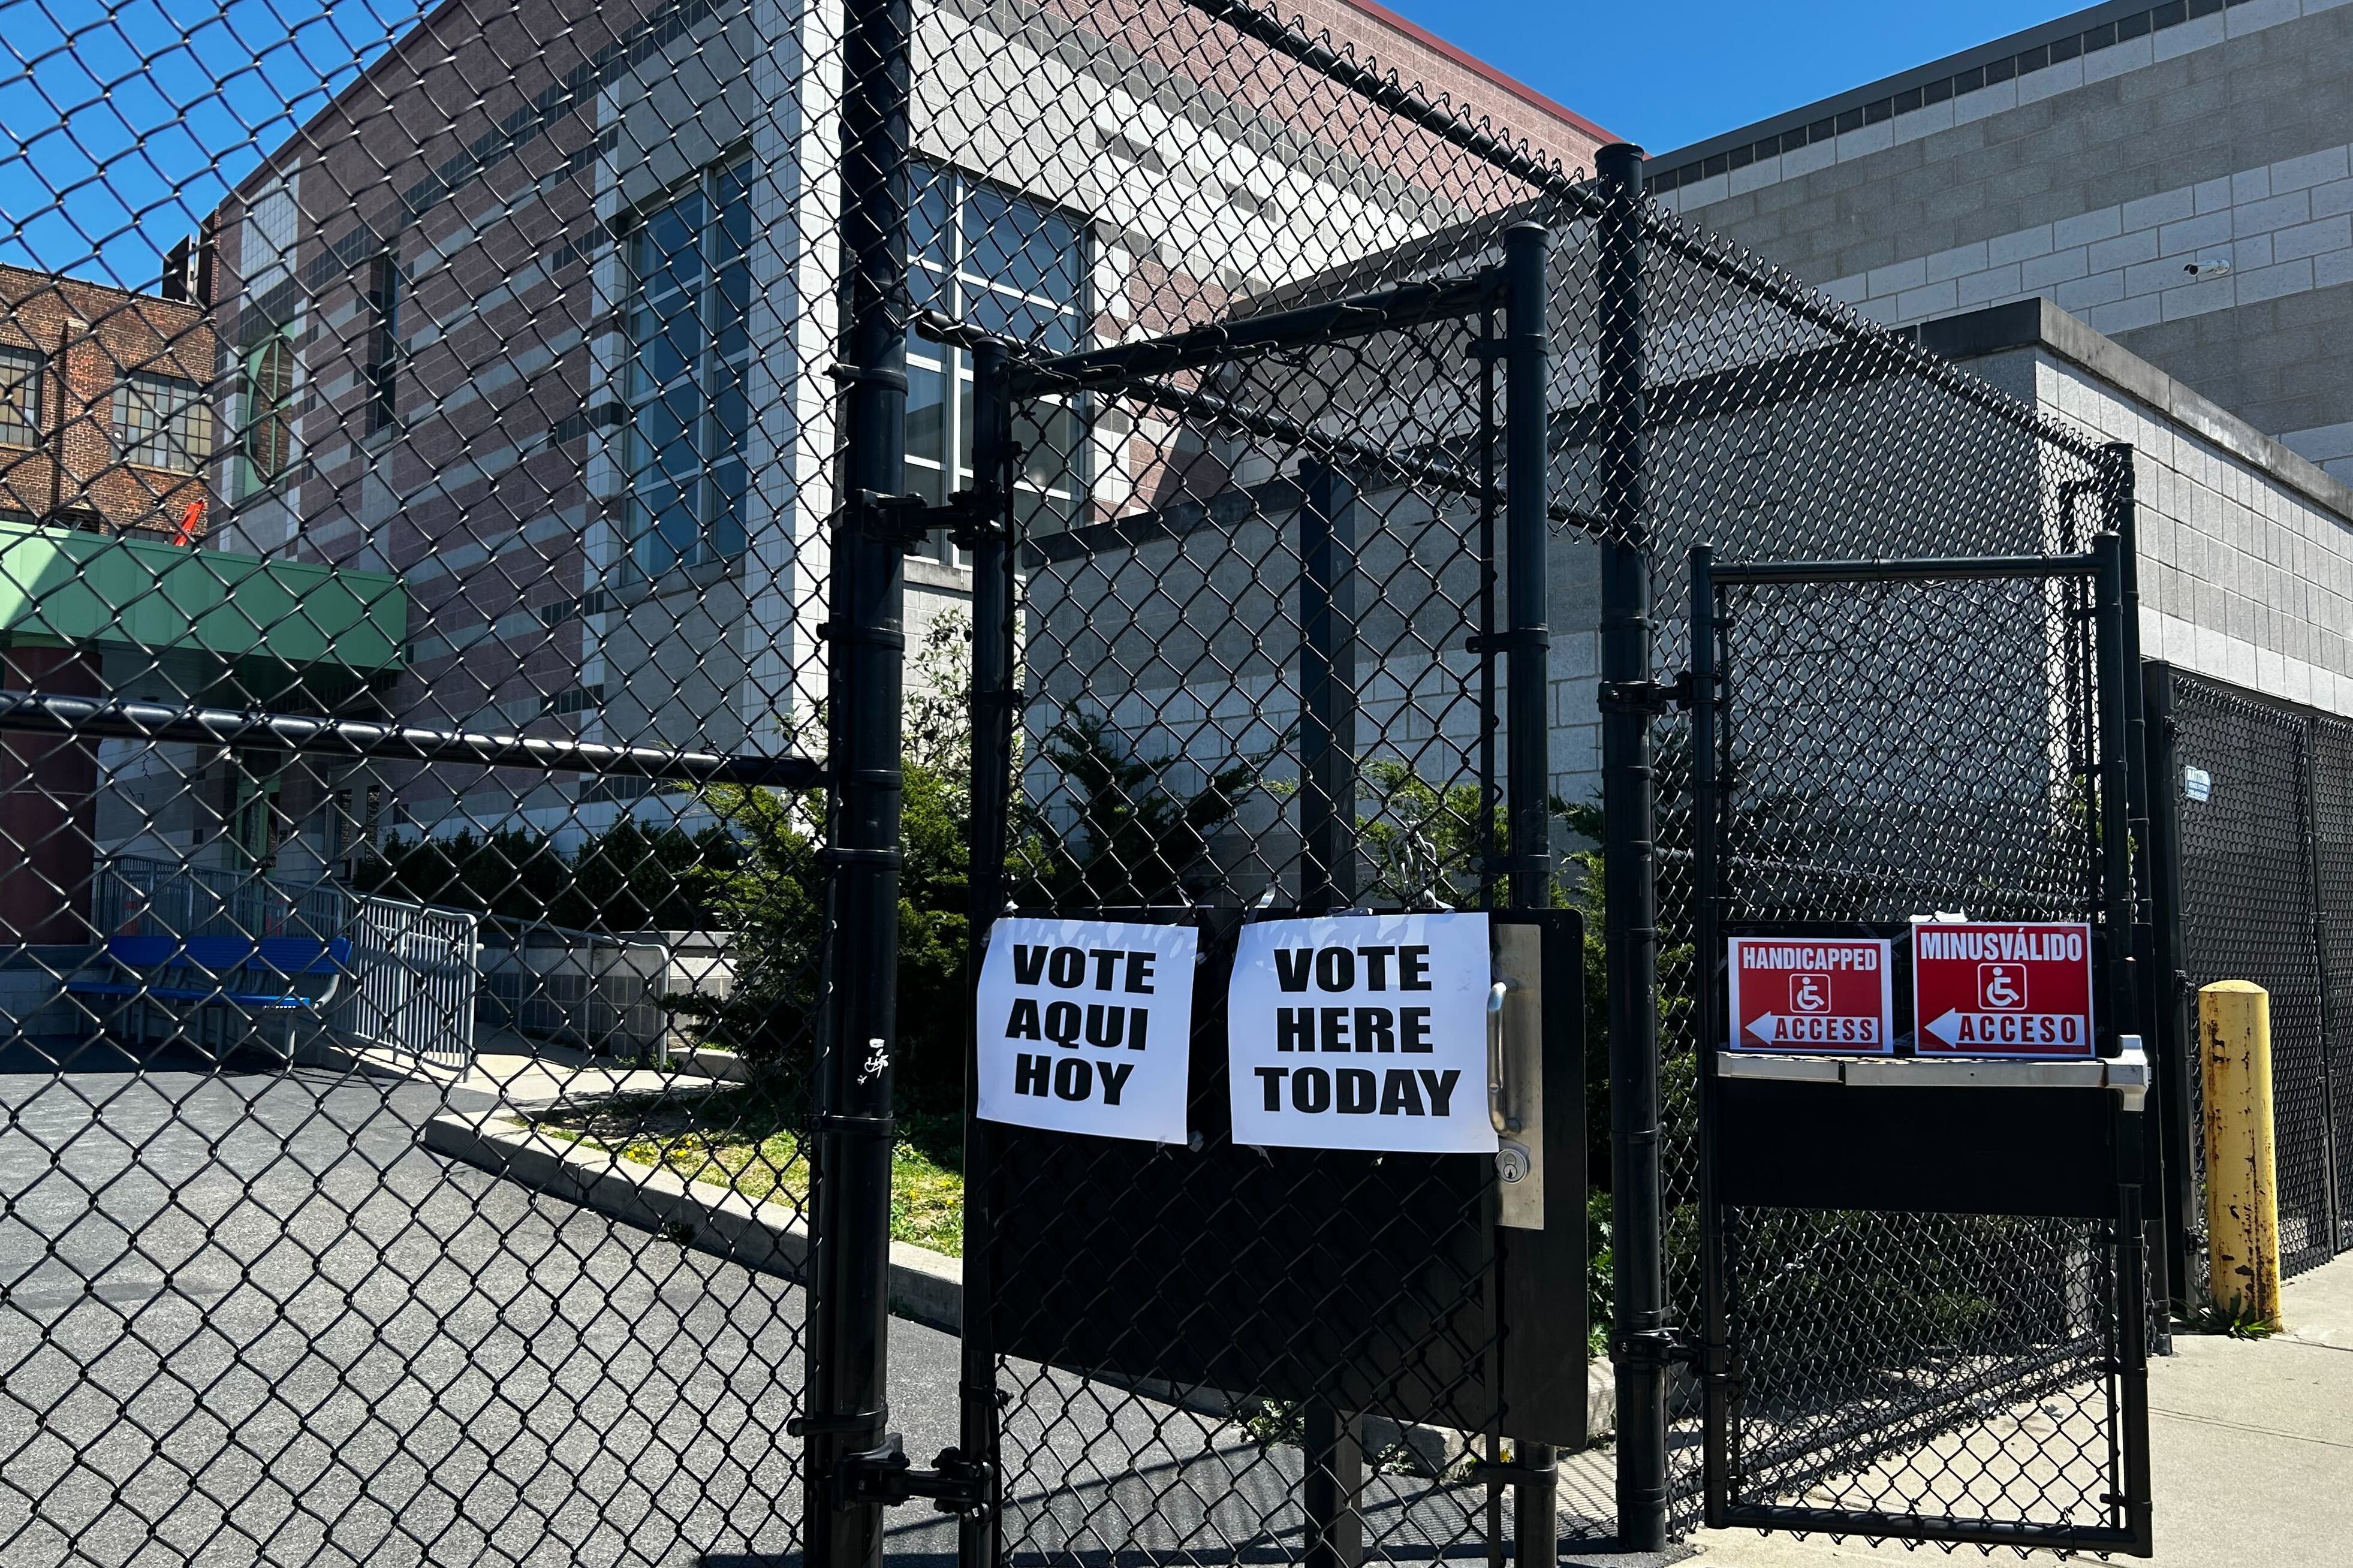 A fence with voting information on it in front of a brick building.